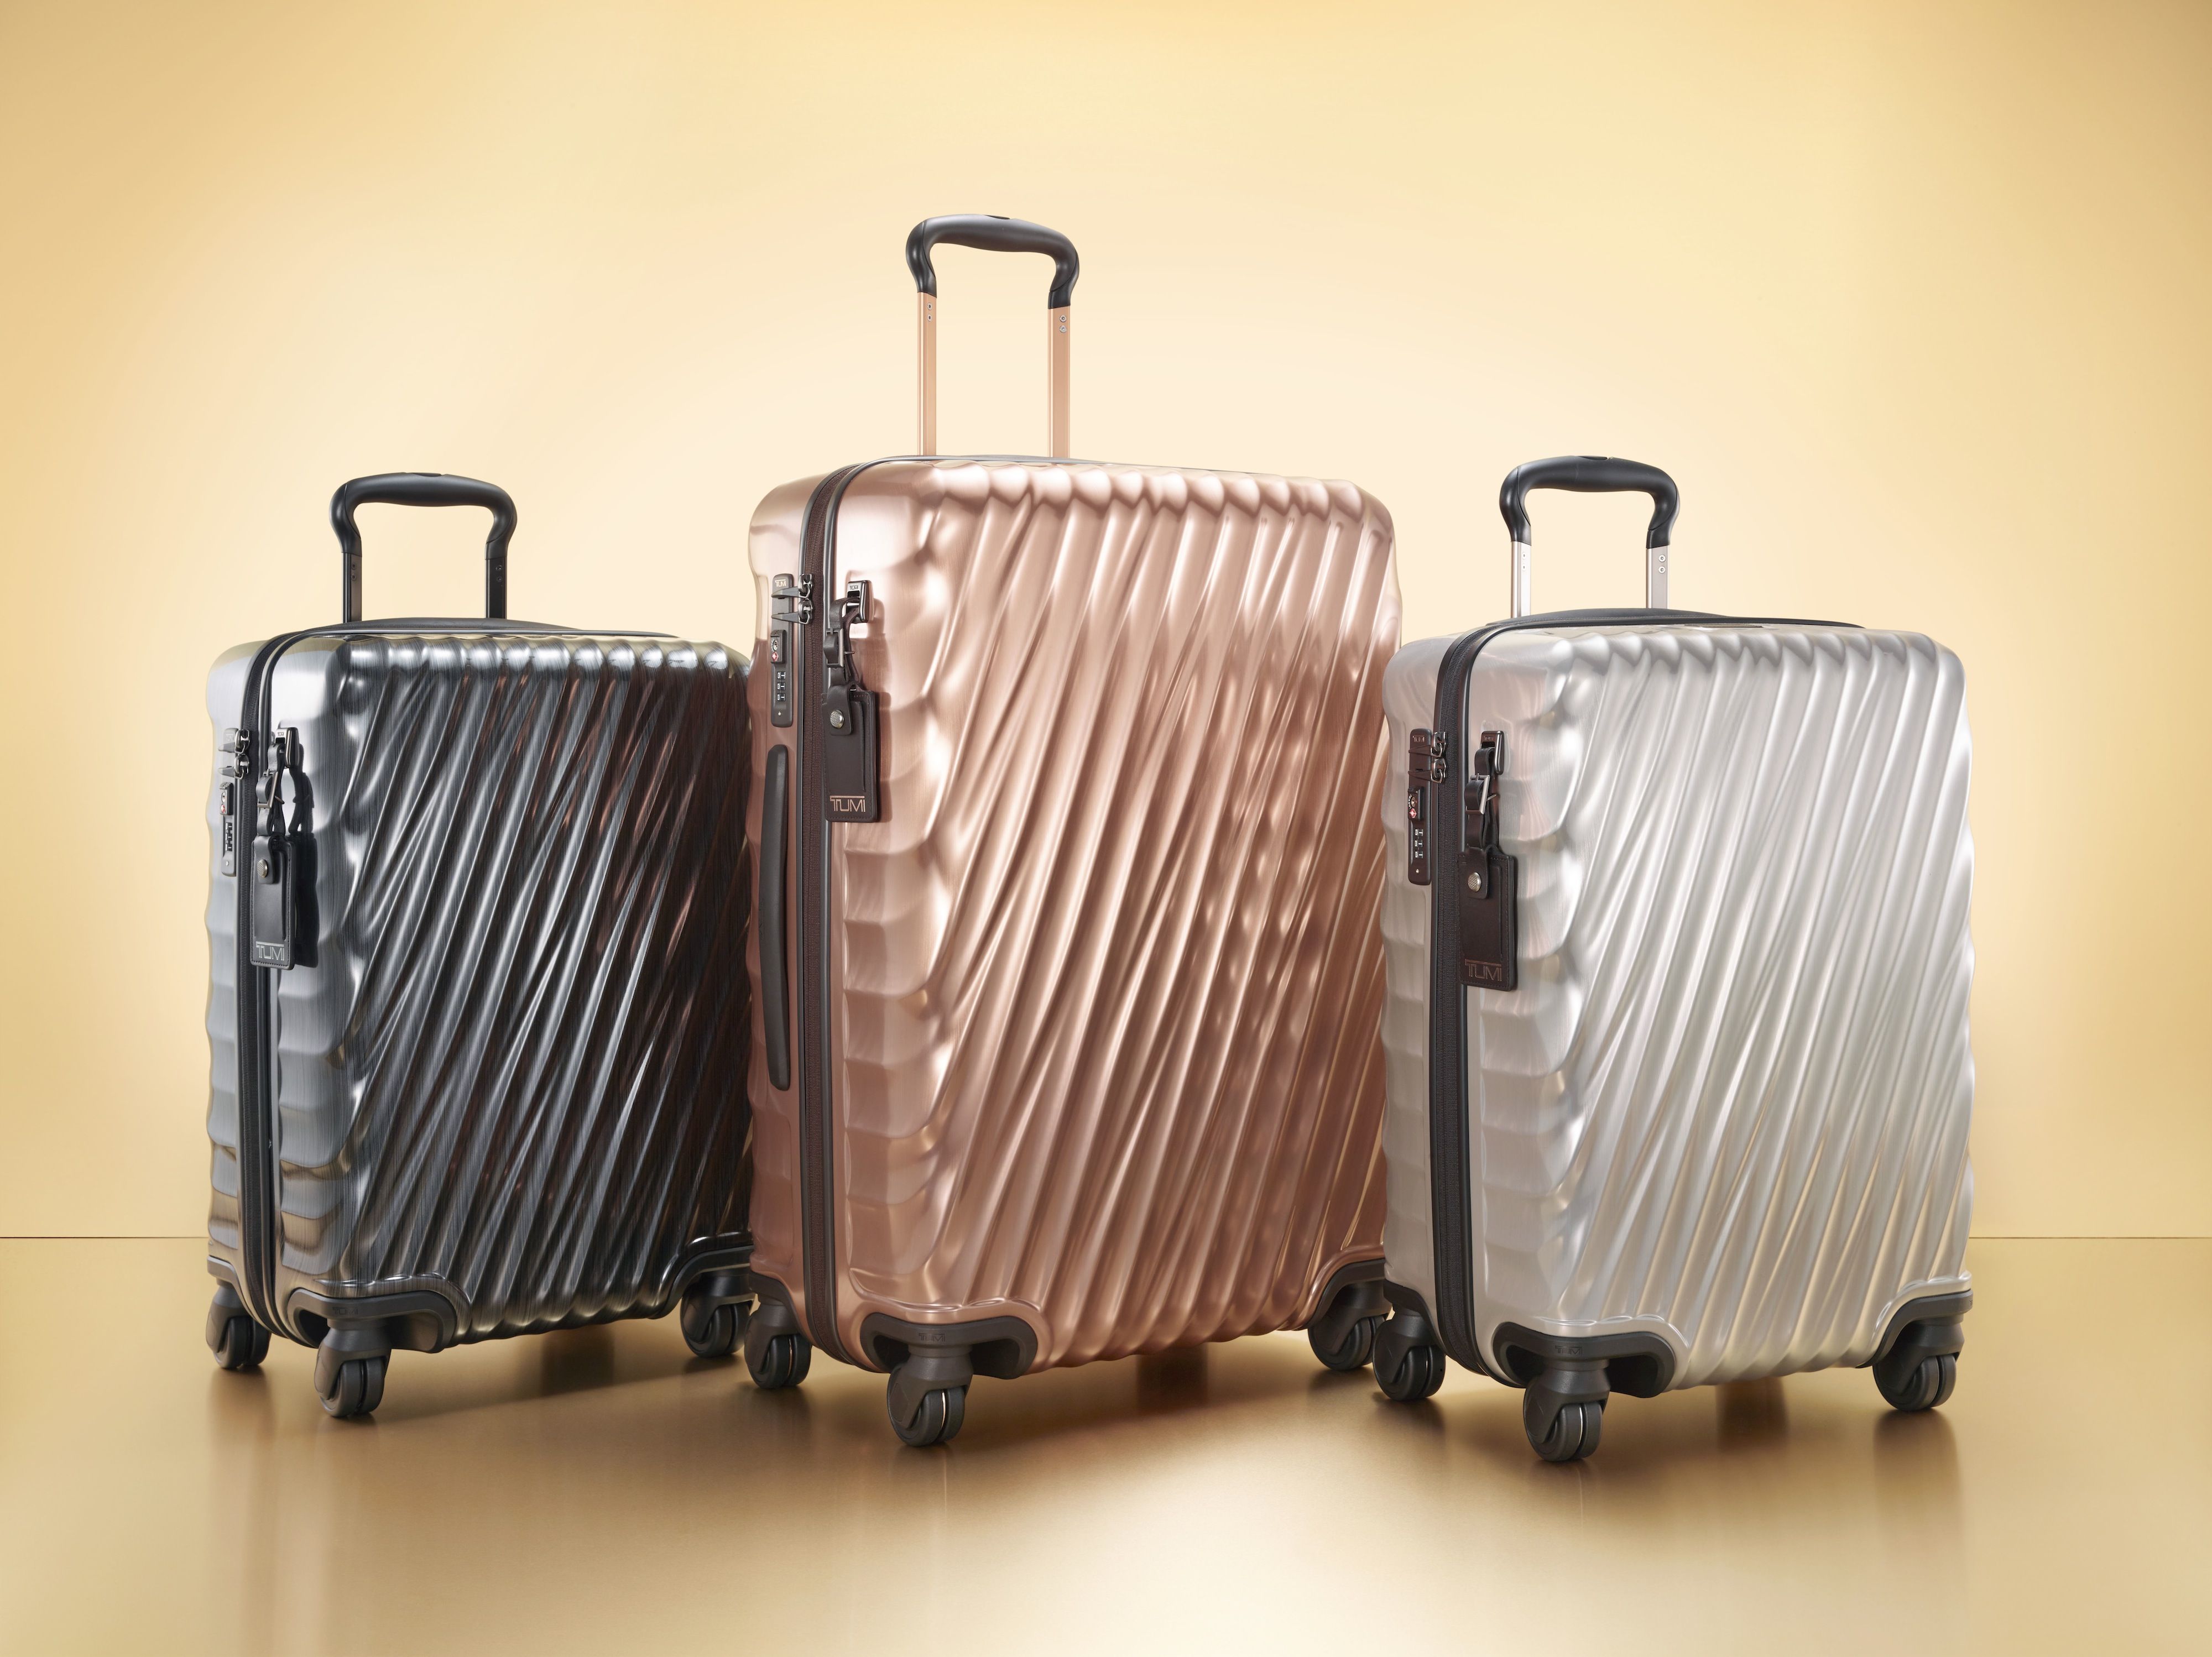 Travel angle: 5 things we love about the Tumi 19 Degree collection